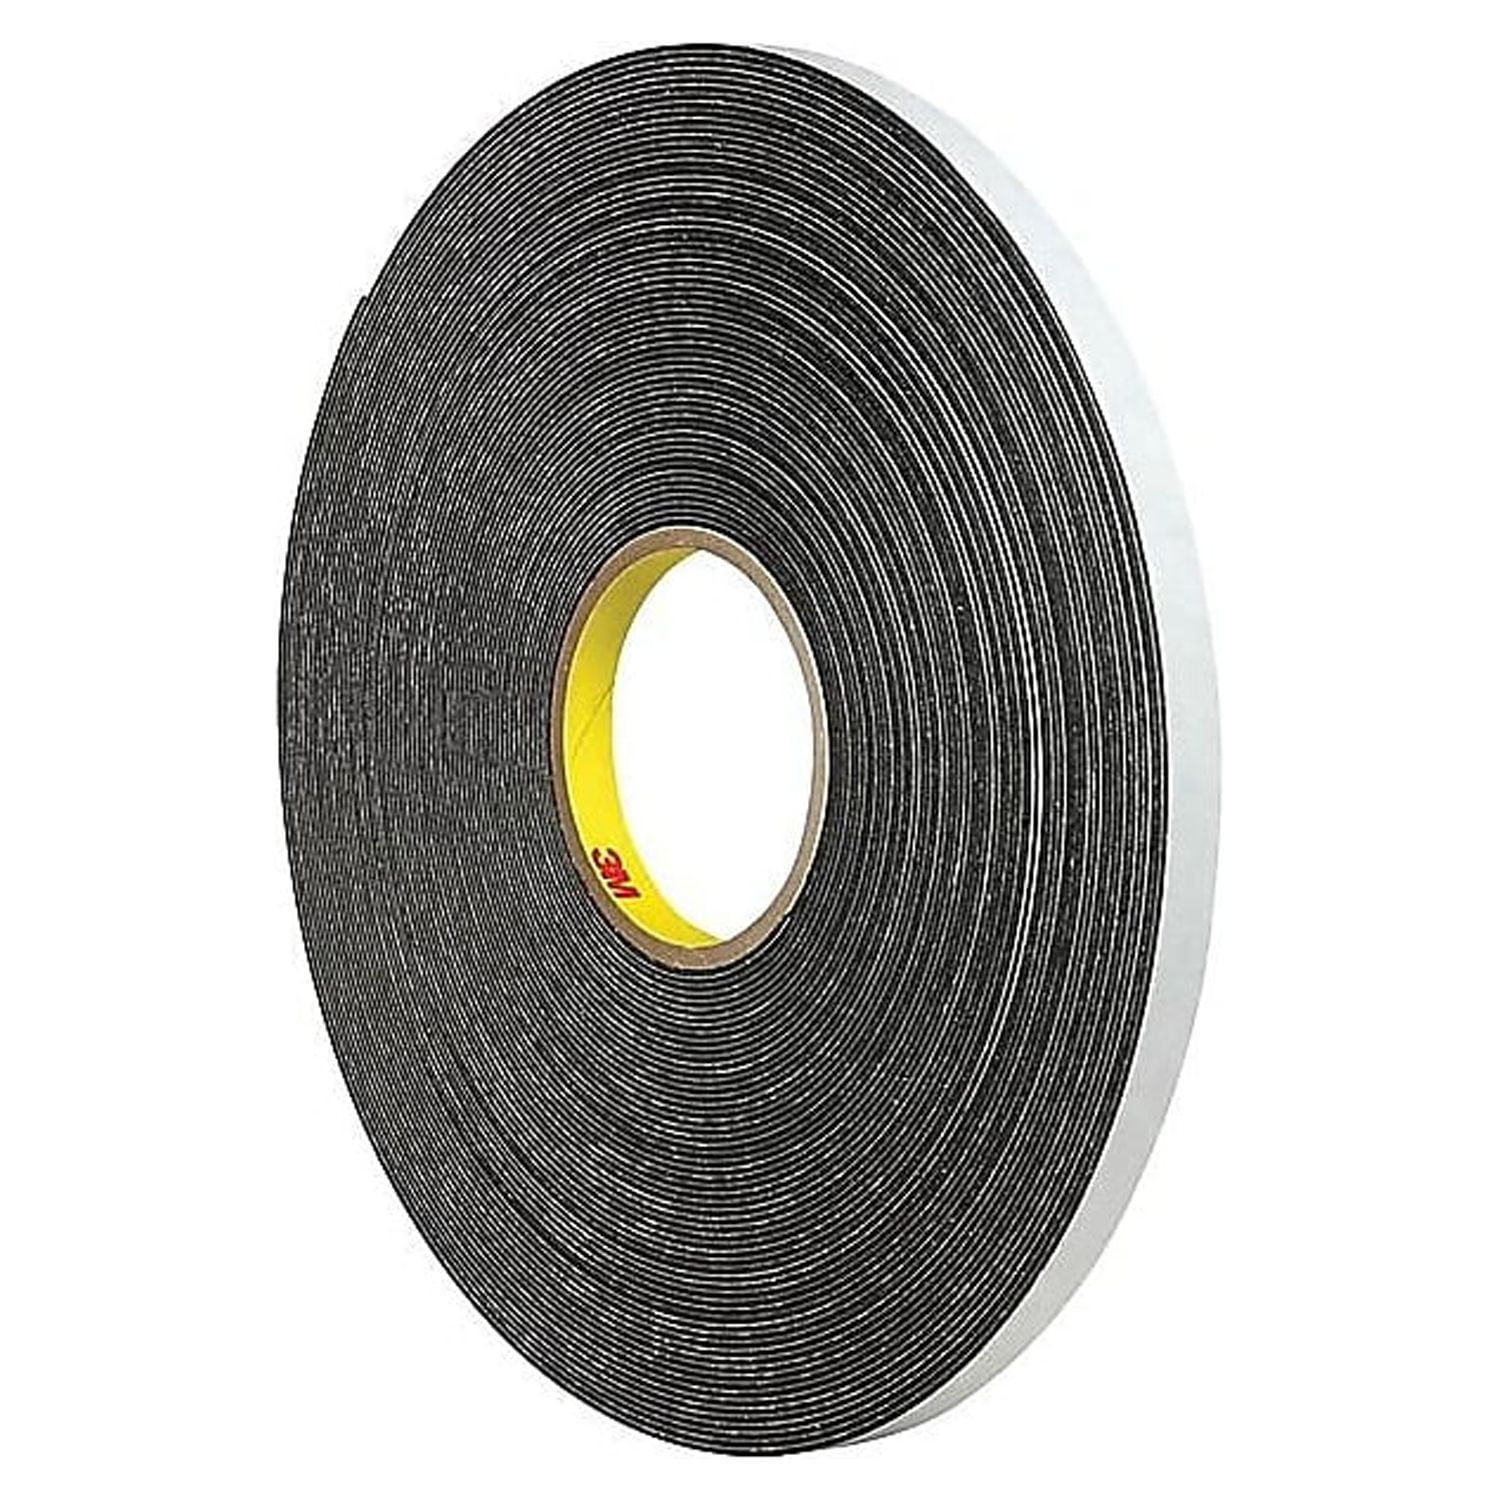 3M™ VHB™ 5906 Double Sided Tape, 6 mil, Black